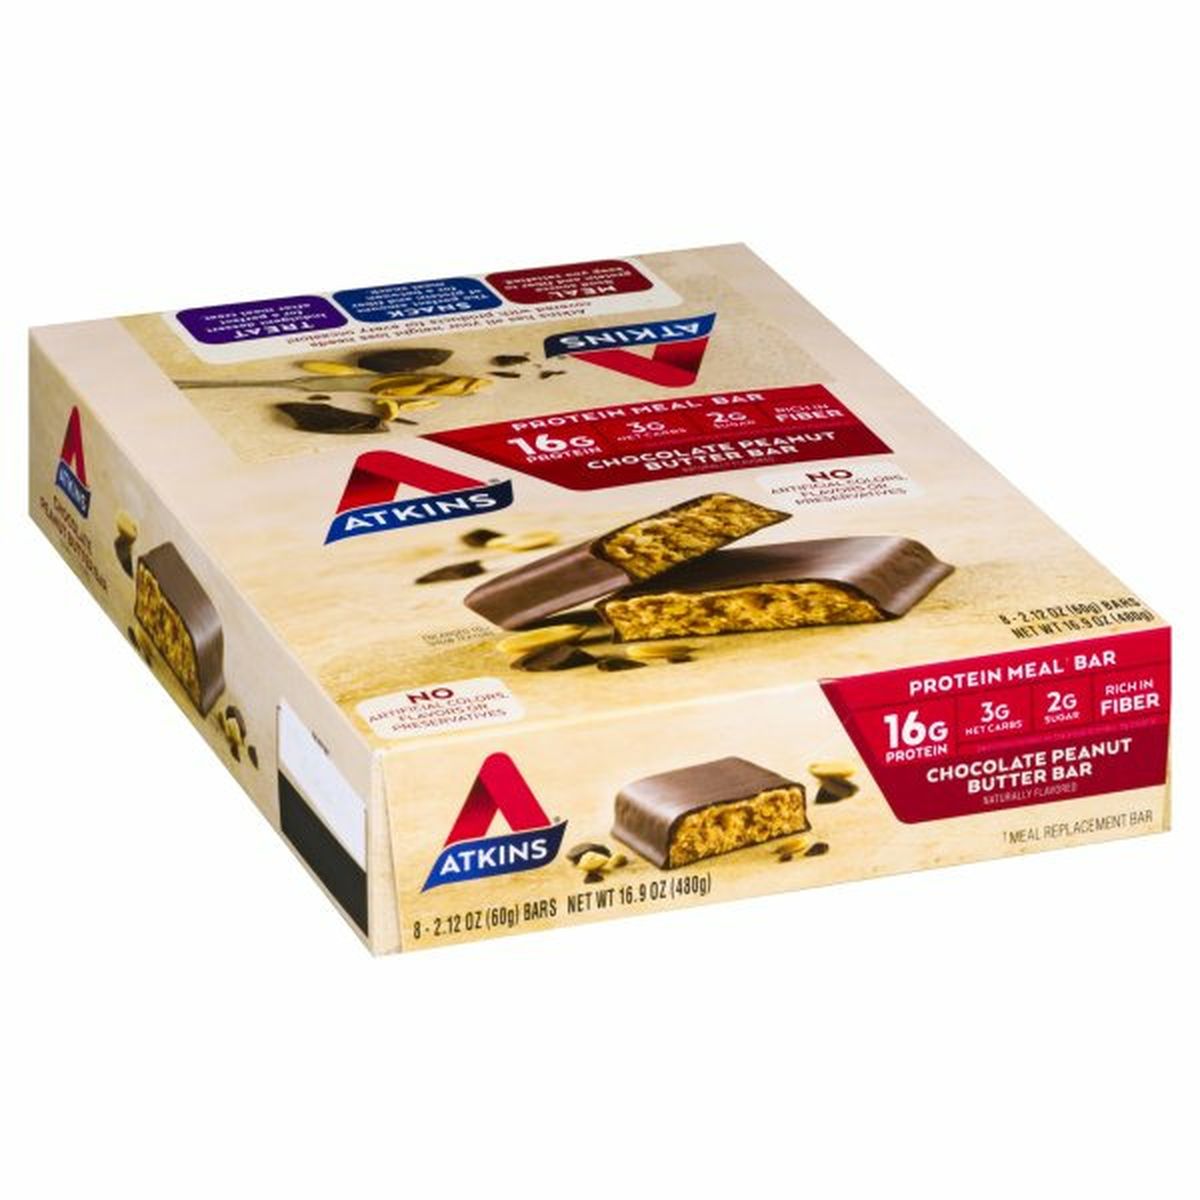 Calories in Atkins Protein Meal Bar, Chocolate Peanut Butter